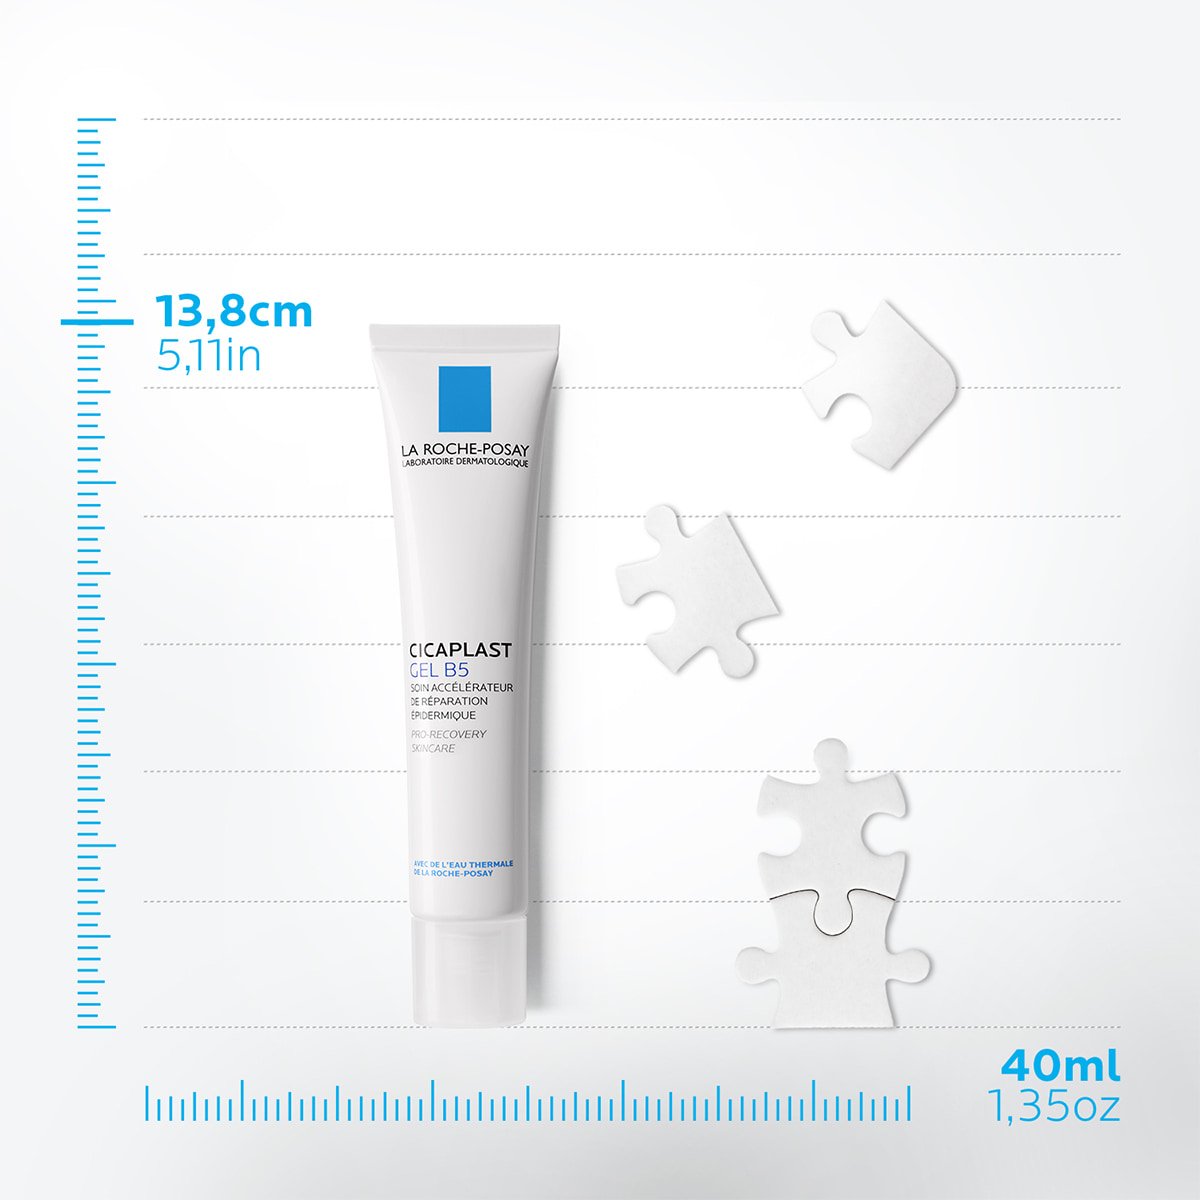 La Roche Posay ProductPage Damaged Cicaplast Gel B5 Pro Recovery Textu